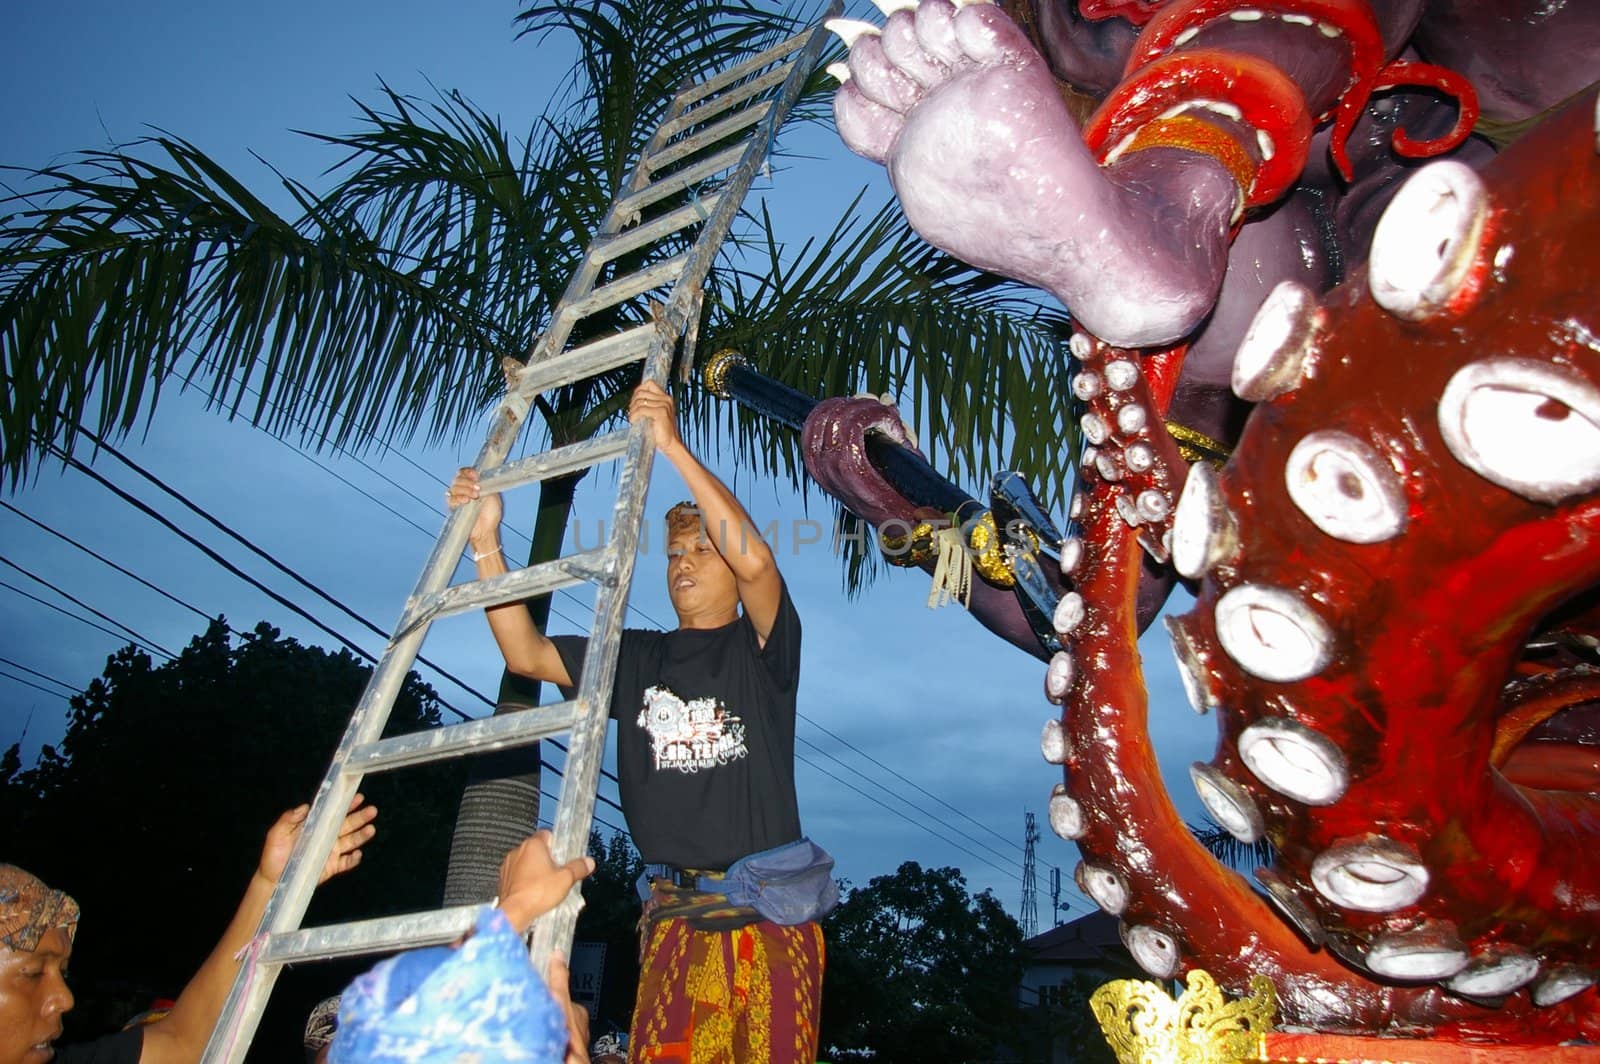 Setting up a ladder to climb a giant statue at the Balinese Hindu festival of Pengrupukan, in Nusa Dua, Bali, March 15, 2008. The annual festival is to roust out the devils which have gone into hiding on the island.